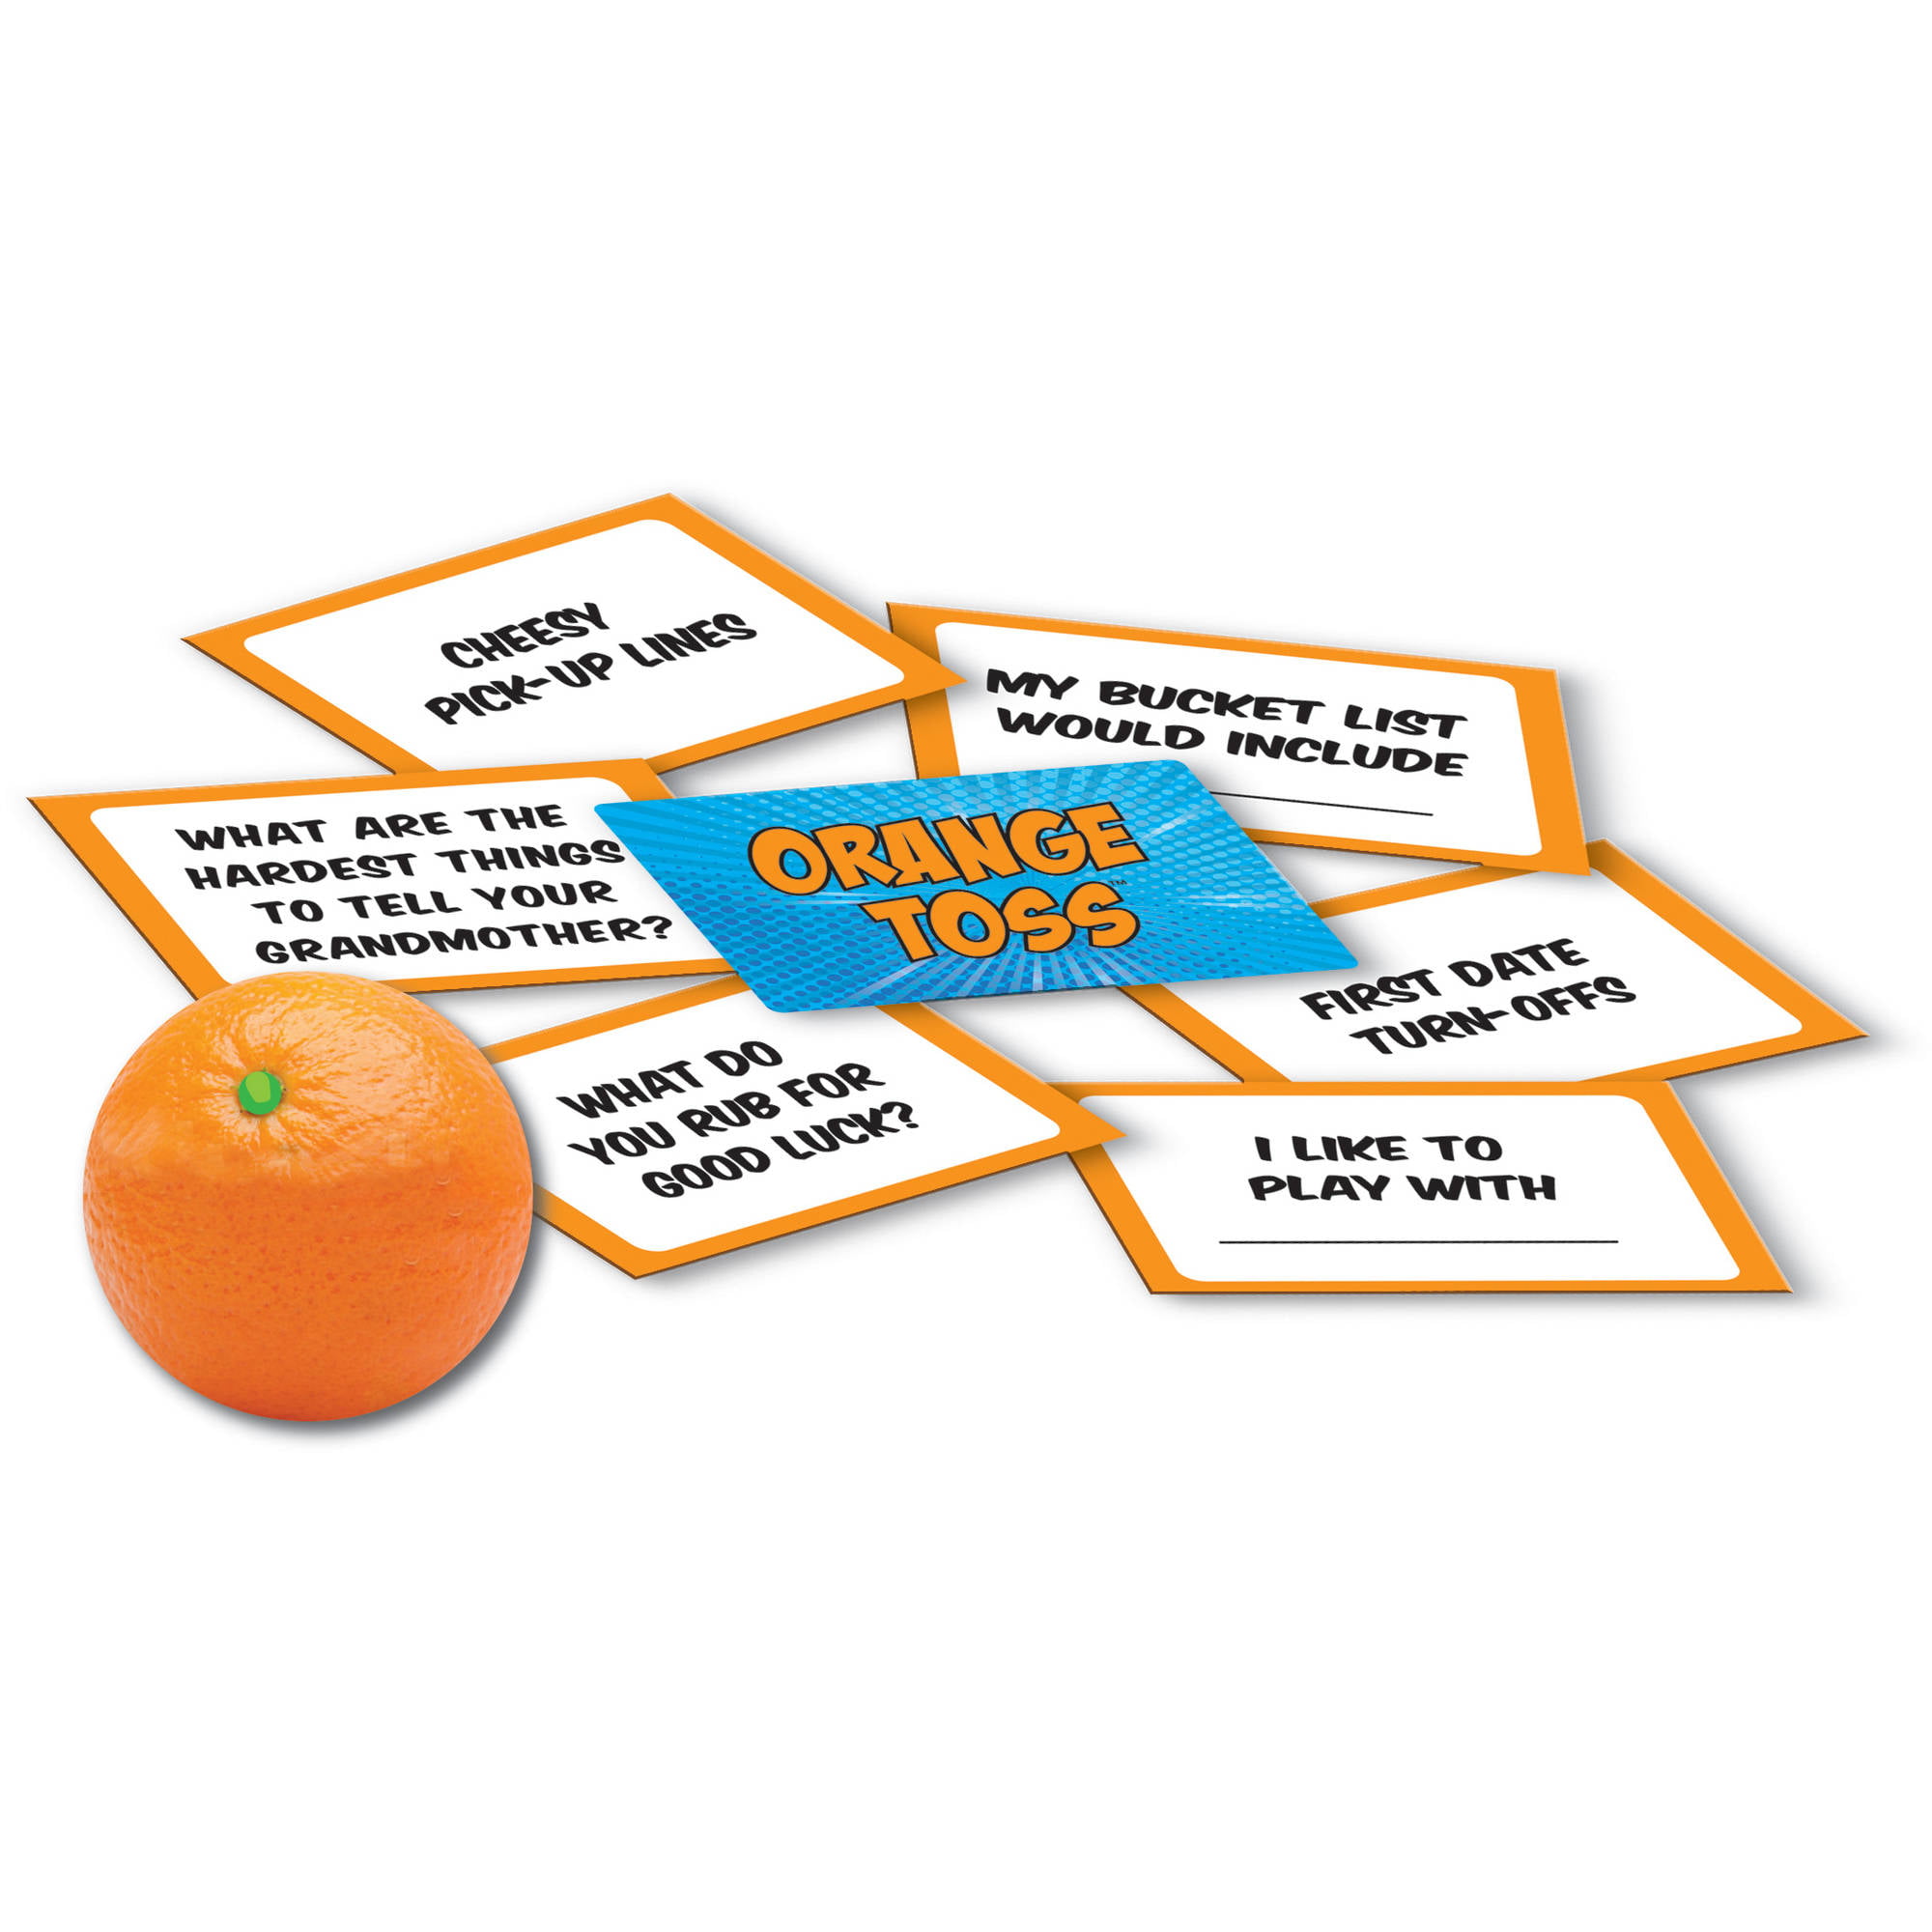 ORANGE TOSS A QUICK-THINKING NOT-SO-SUBTLE ADULT PARTY GAME UNIVERSITY GAMES 